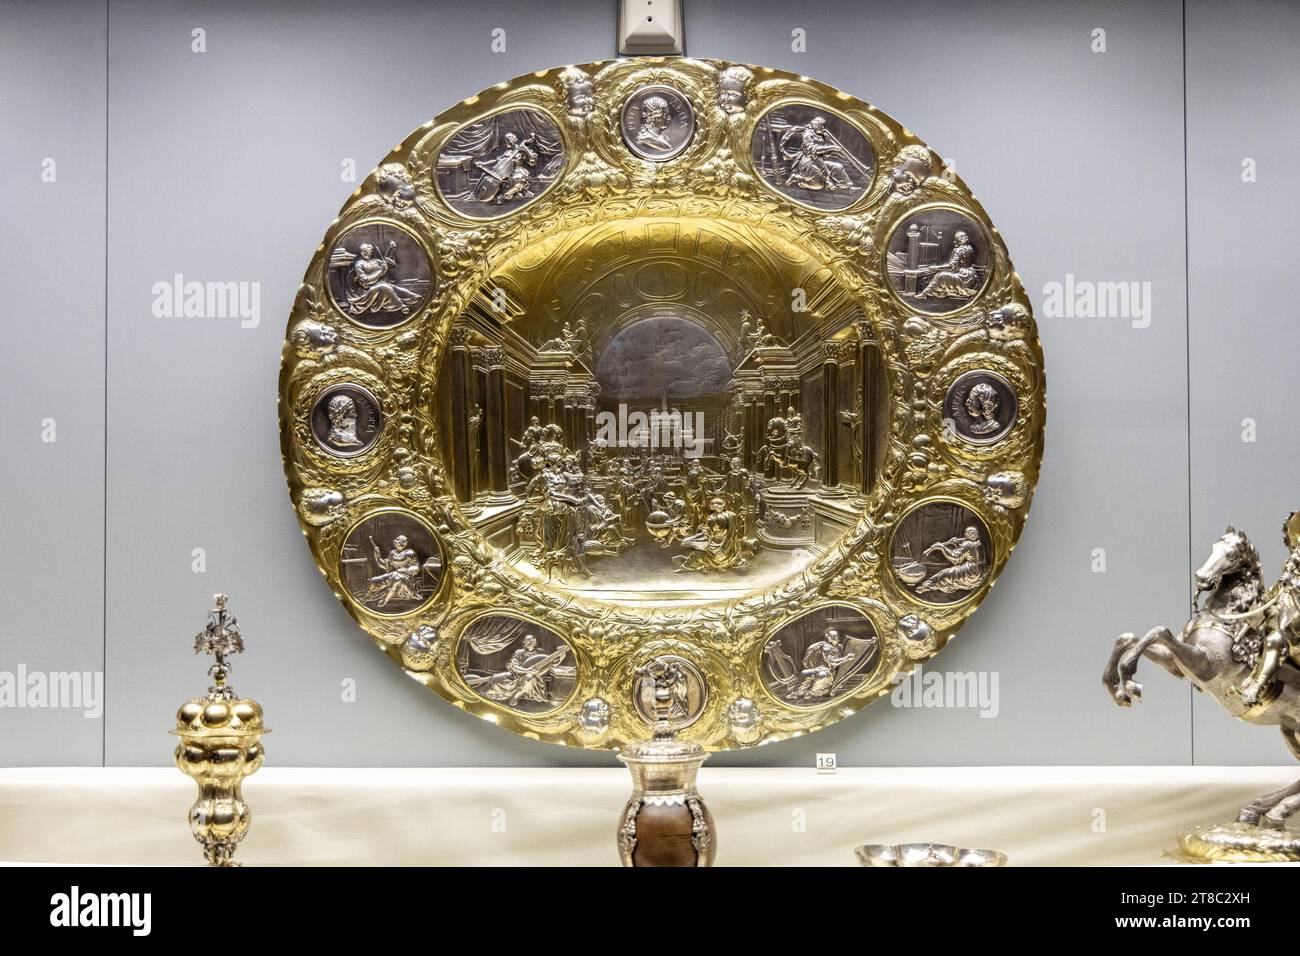 Gilded silver dish from 1674 by Hans Jacob Mair, Art & History Museum, Brussels, Belgium Stock Photo